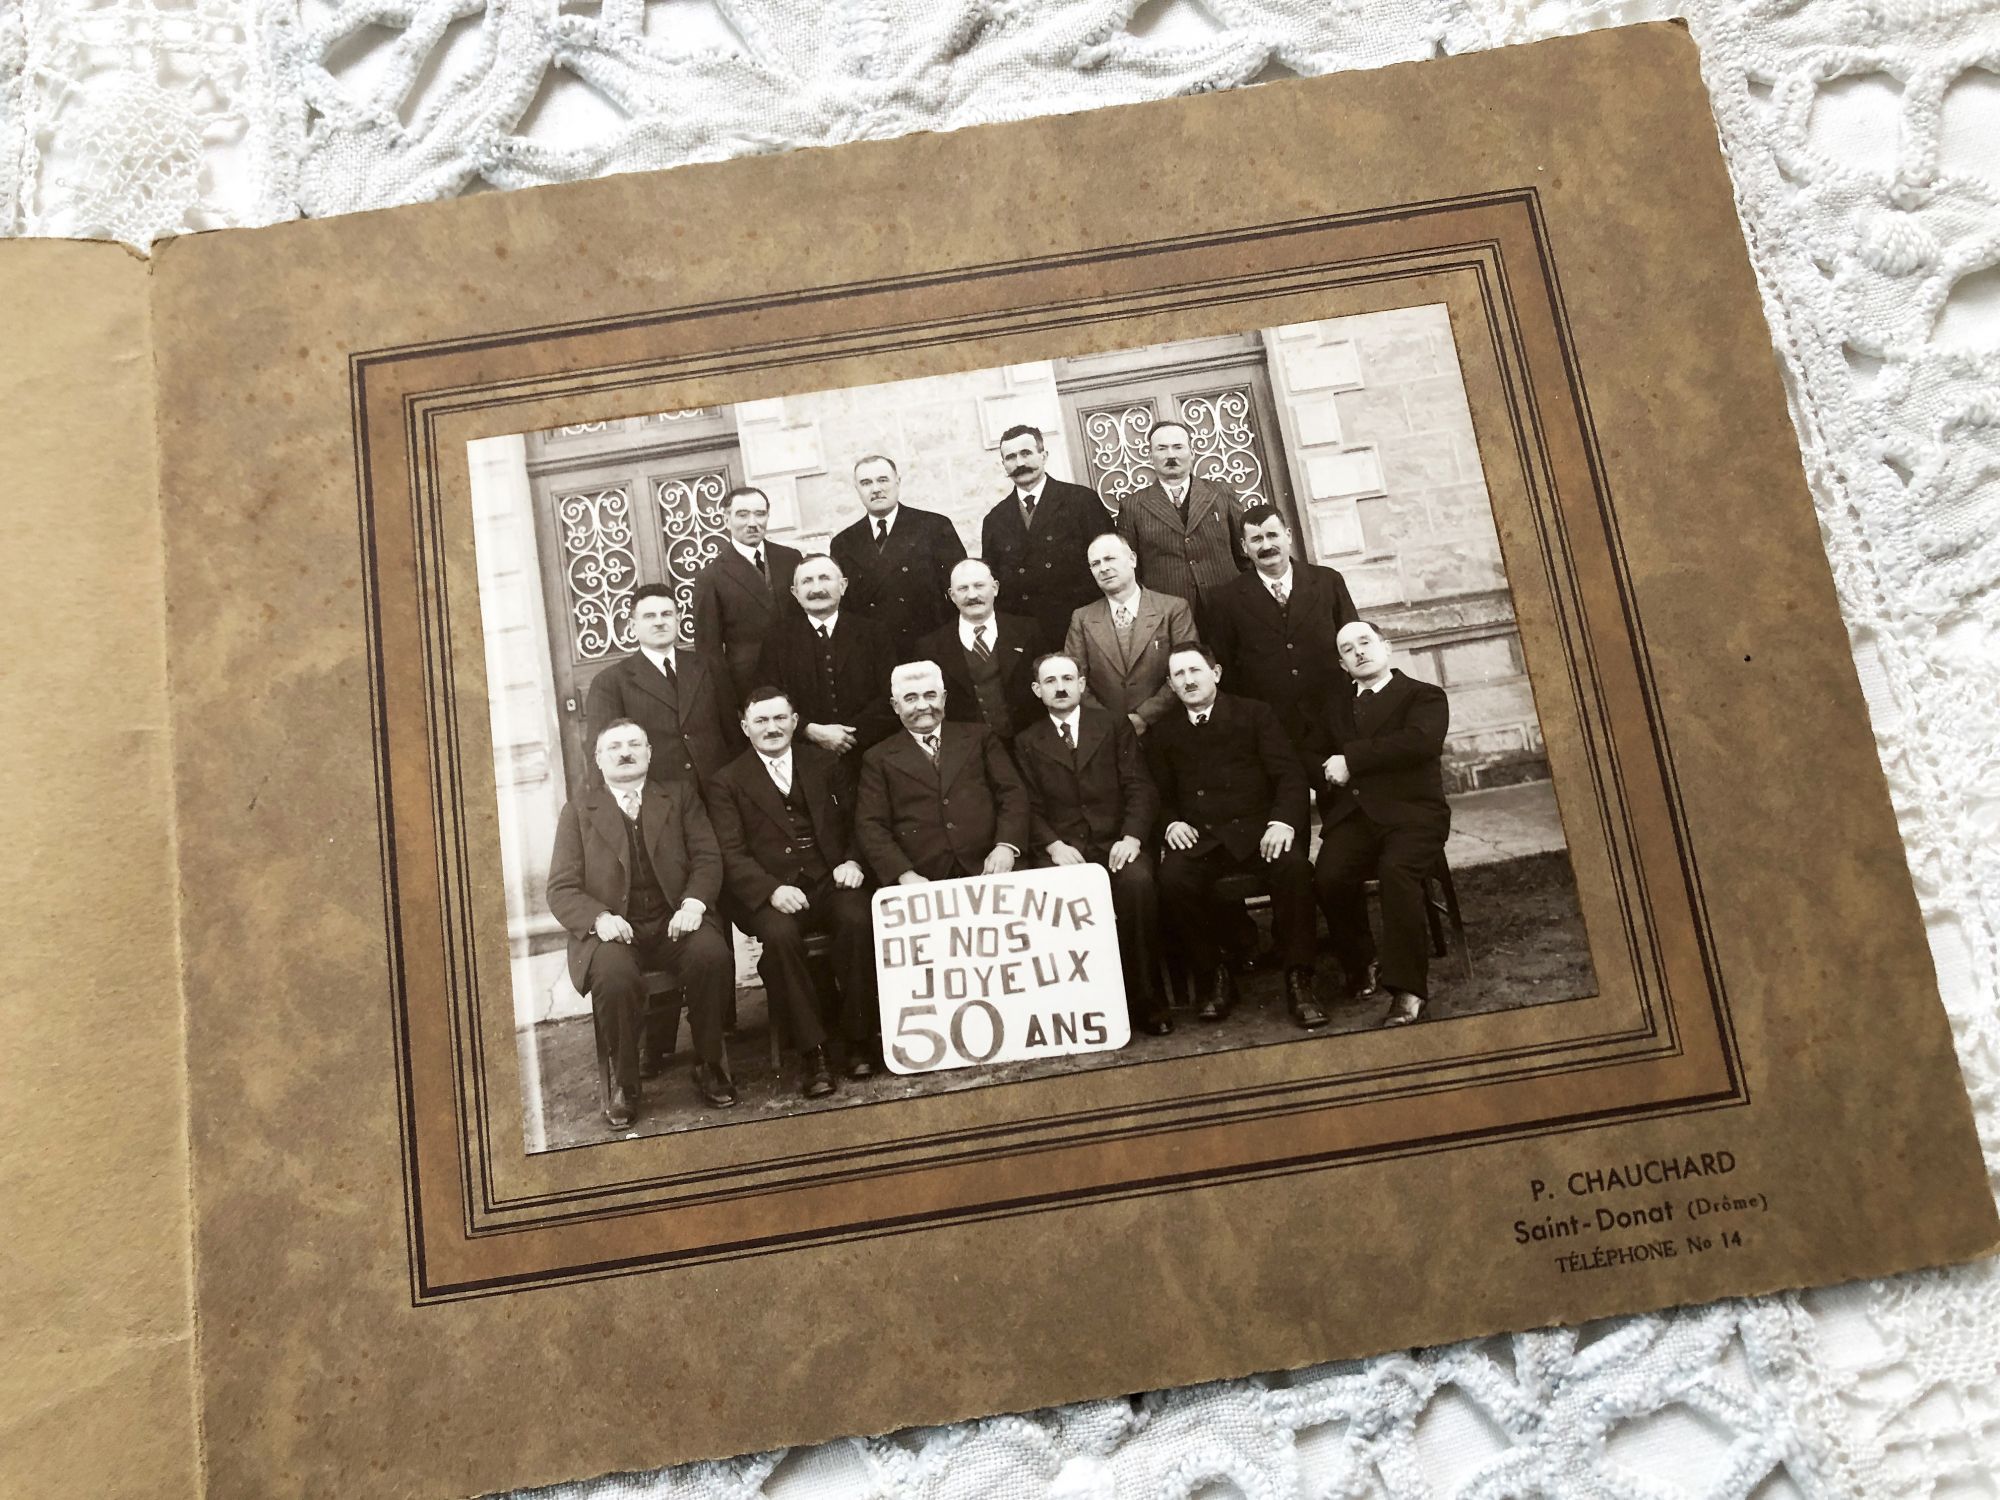 Large photo of 50 years of former classmates or military service comrades from 1930s